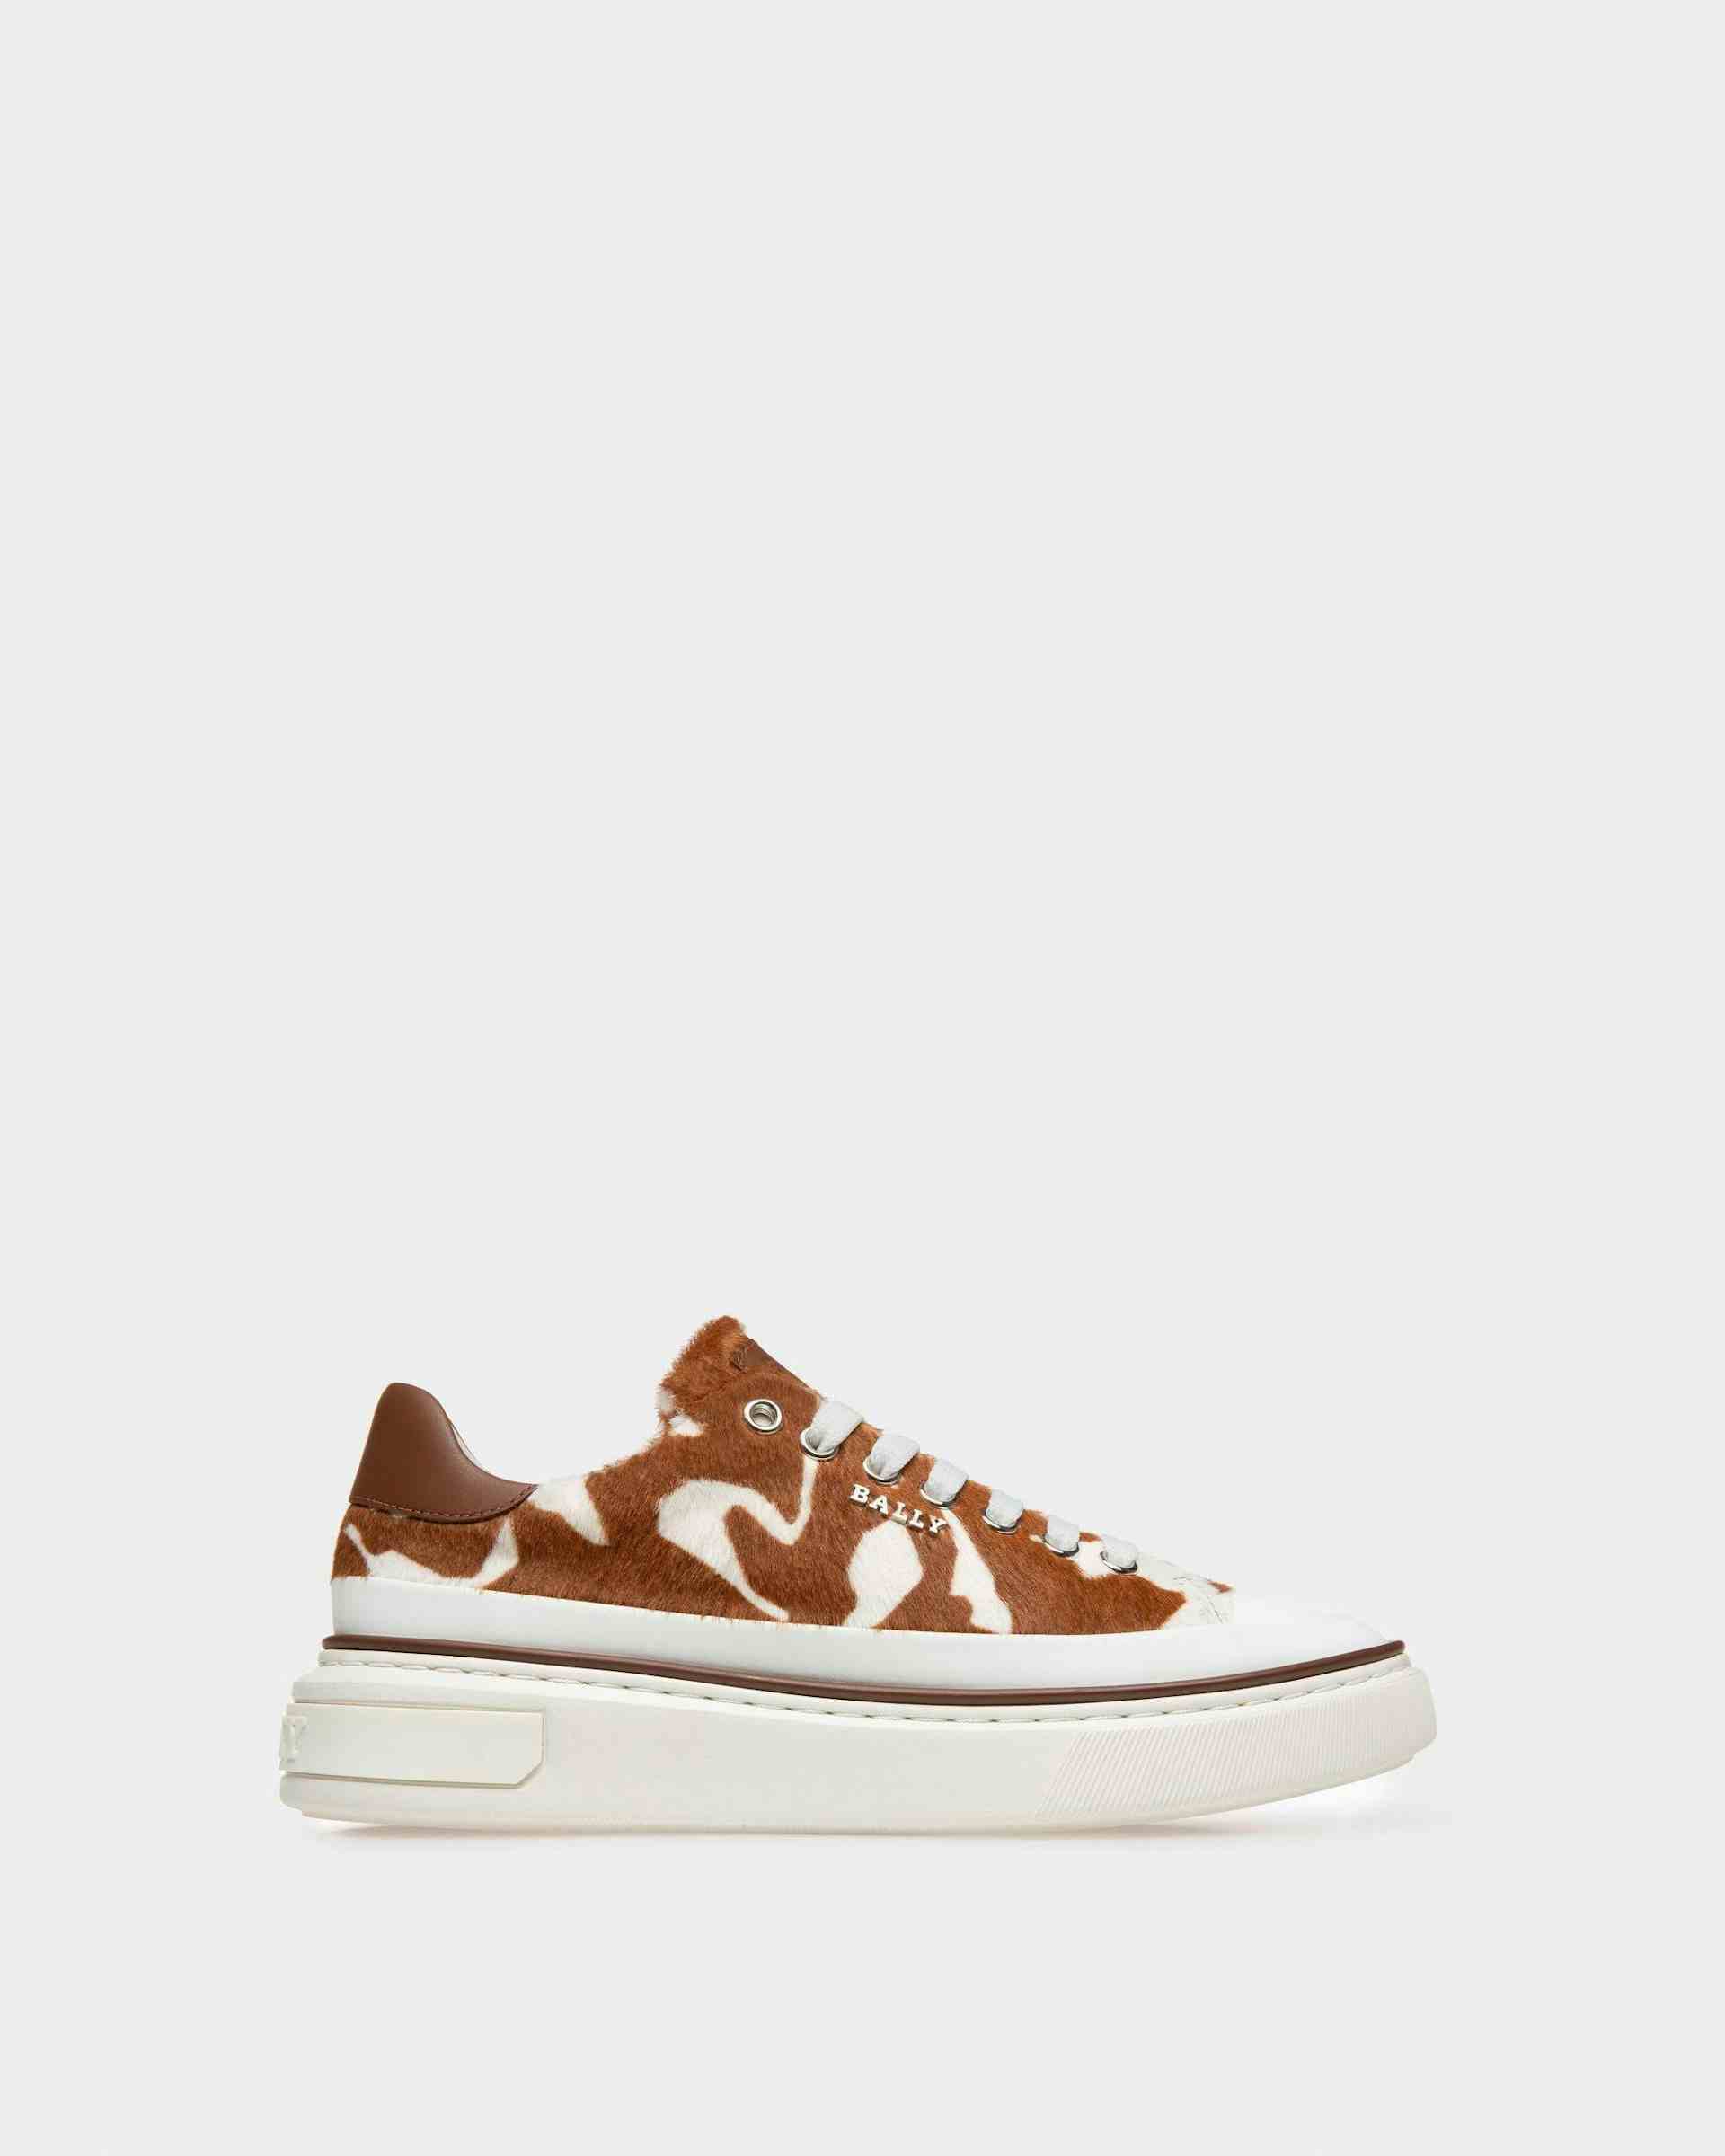 Maily Leather Sneakers In White & Brown - Women's - Bally